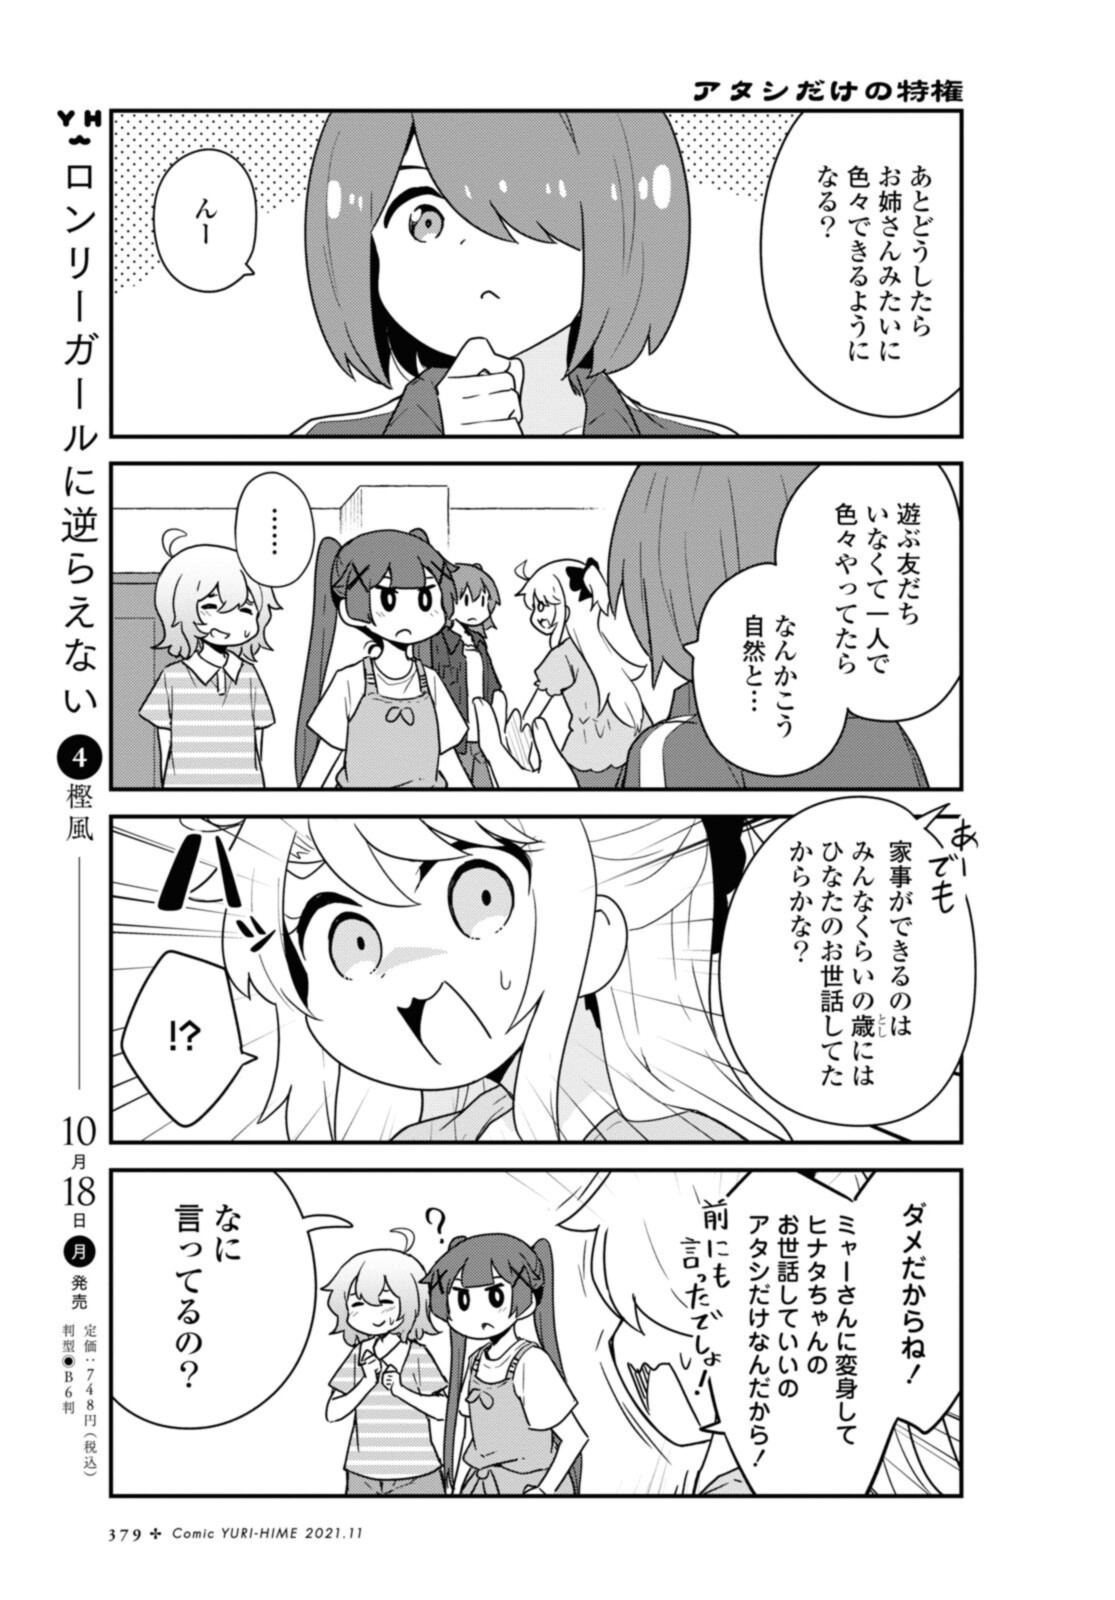 Wataten! An Angel Flew Down to Me 私に天使が舞い降りた！ 第87.1話 - Page 3